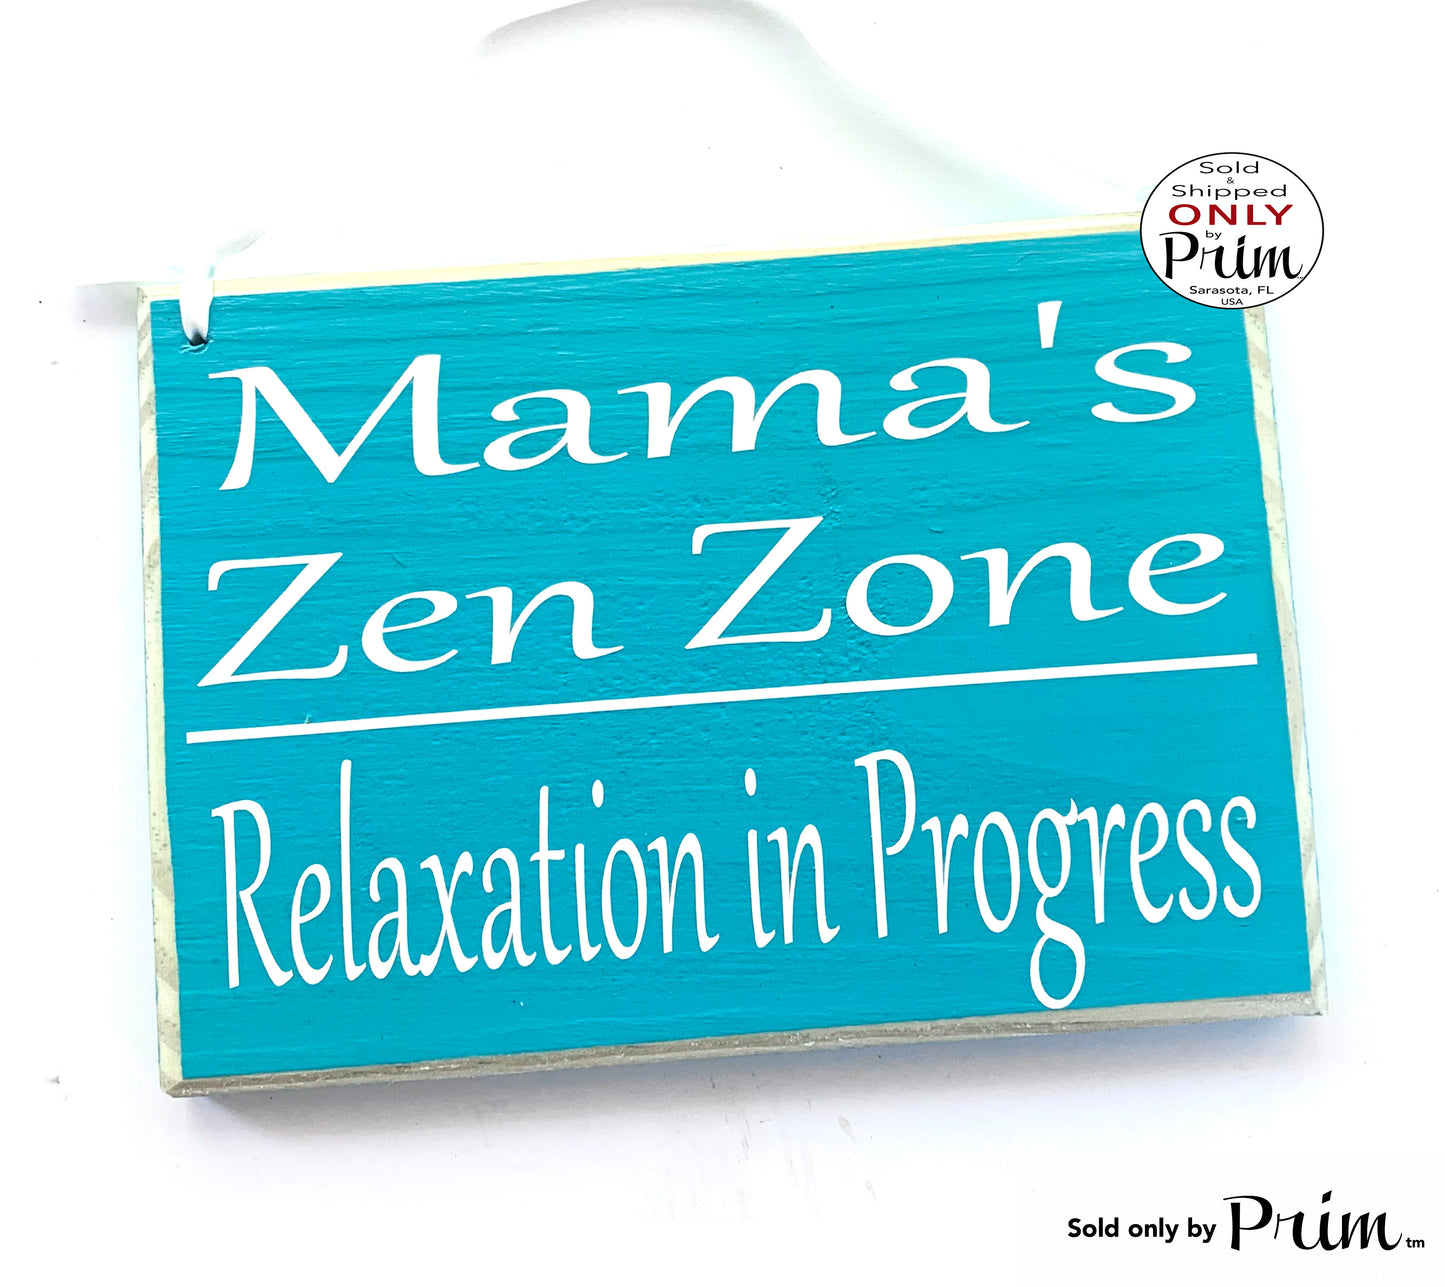 Designs by Prim 8x6 Personalized Name Zen Zone Relaxation in Progress Custom Wood Sign Yoga Meditating Please Do Not Disturb In Session Shhh Door Plaque